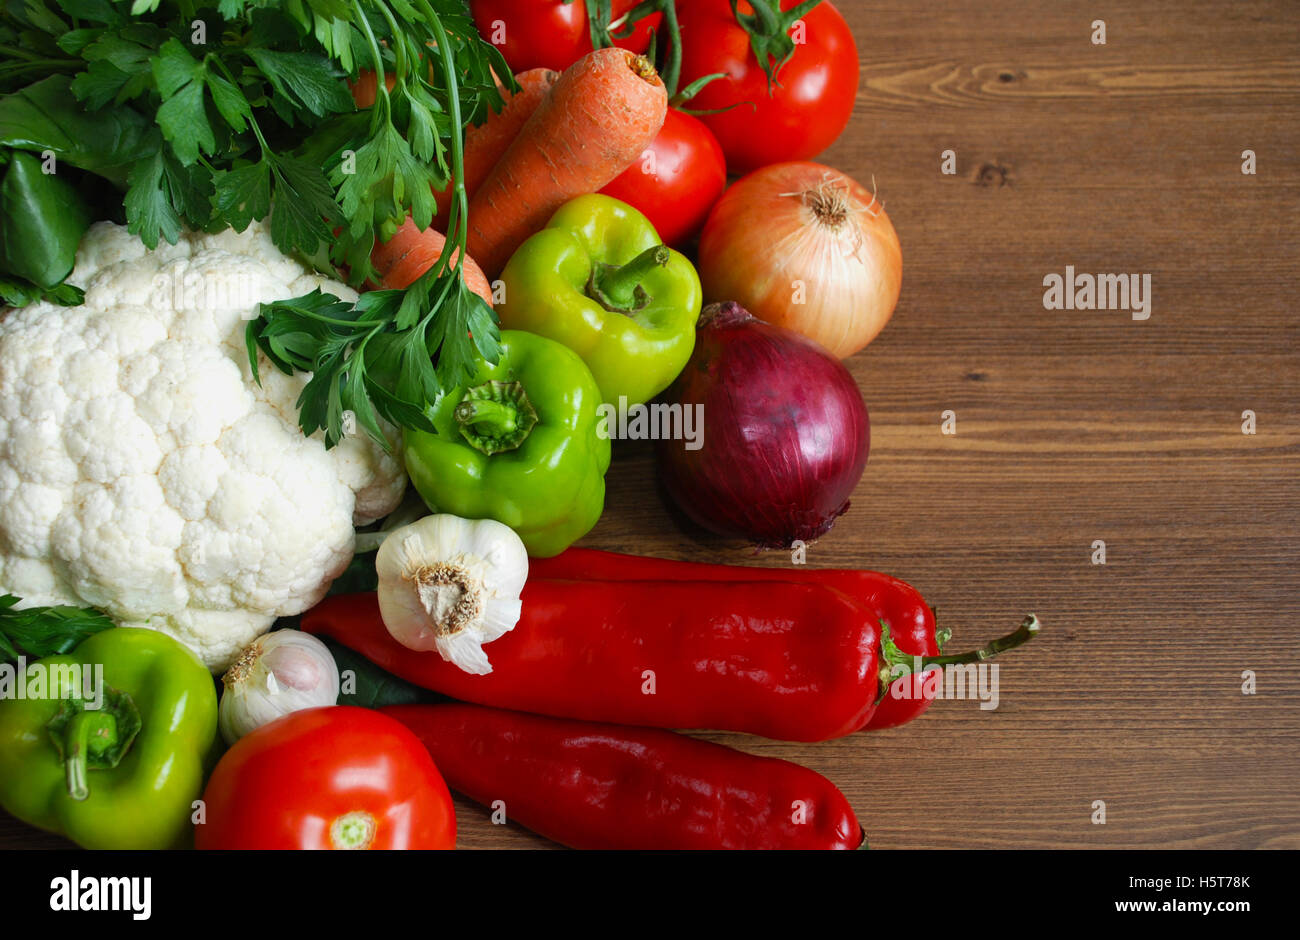 Healthy organic Assortment of fresh vegetables on dark wooden table. Stock Photo